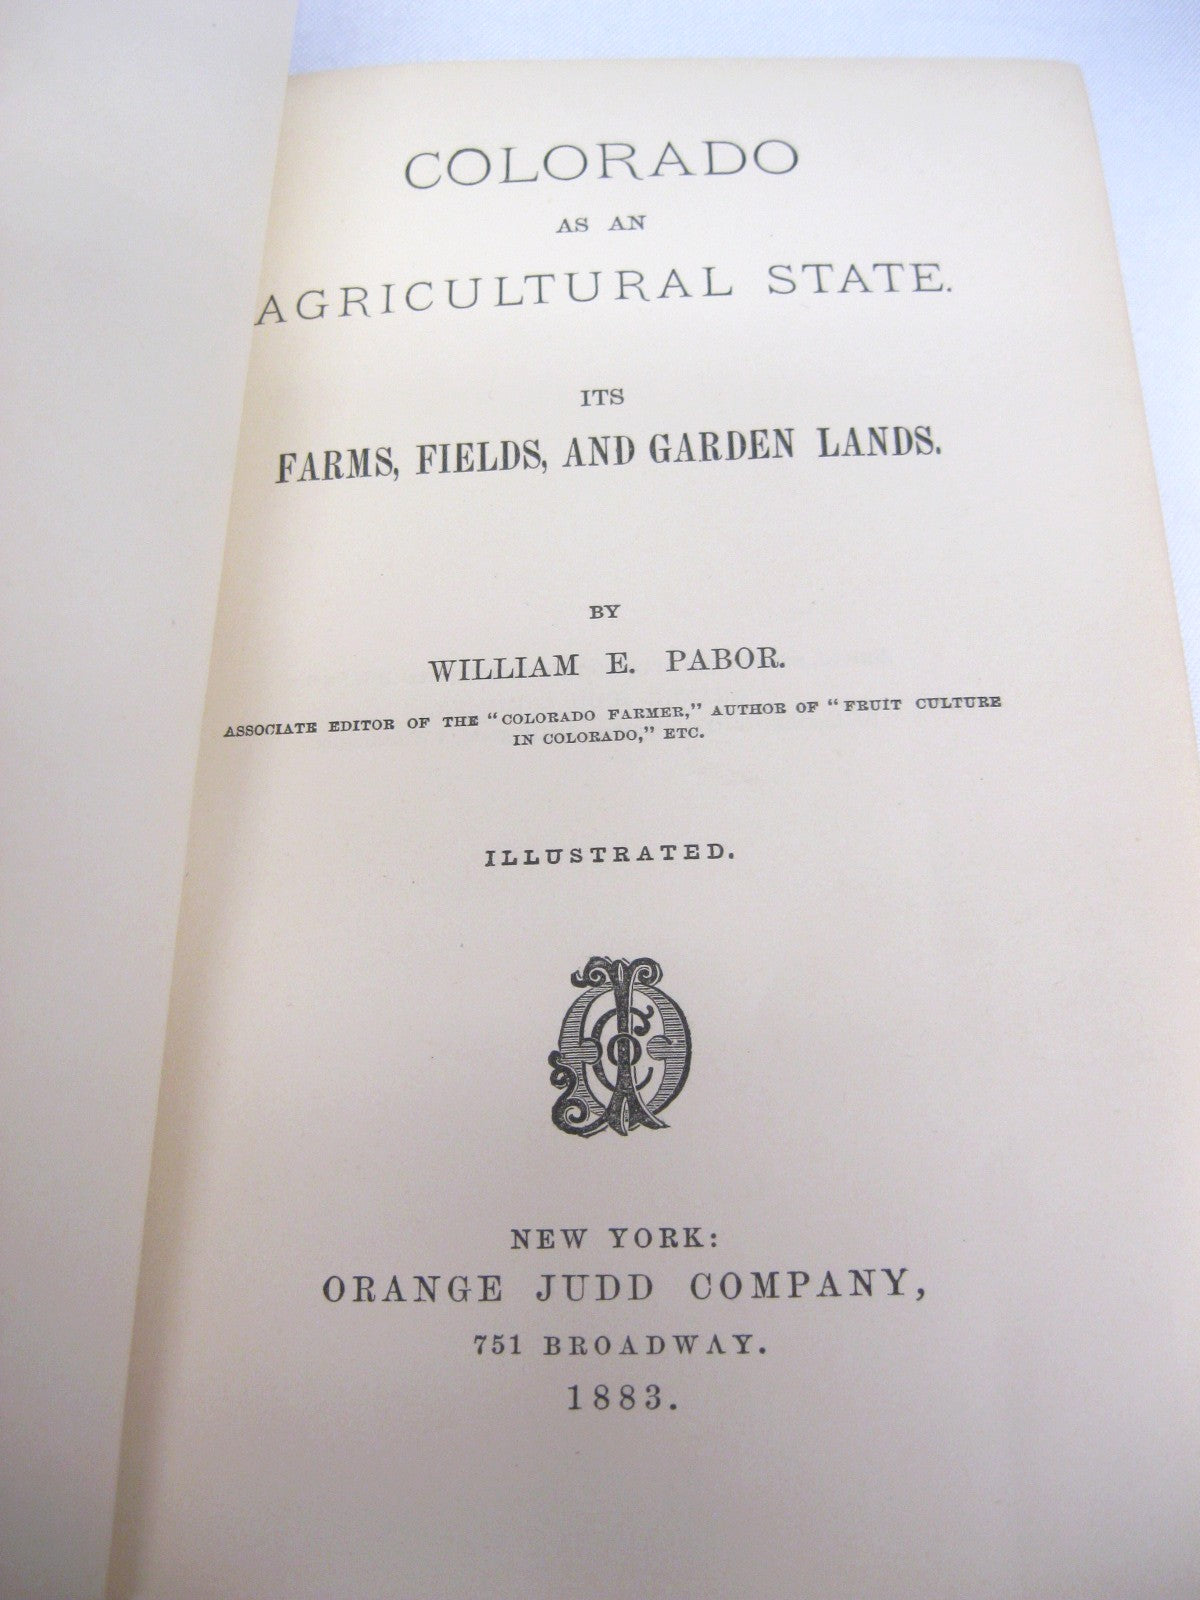 Colorado as an Agricultural State; its Farms, Fields, and Garden Lands by William E. Pabor